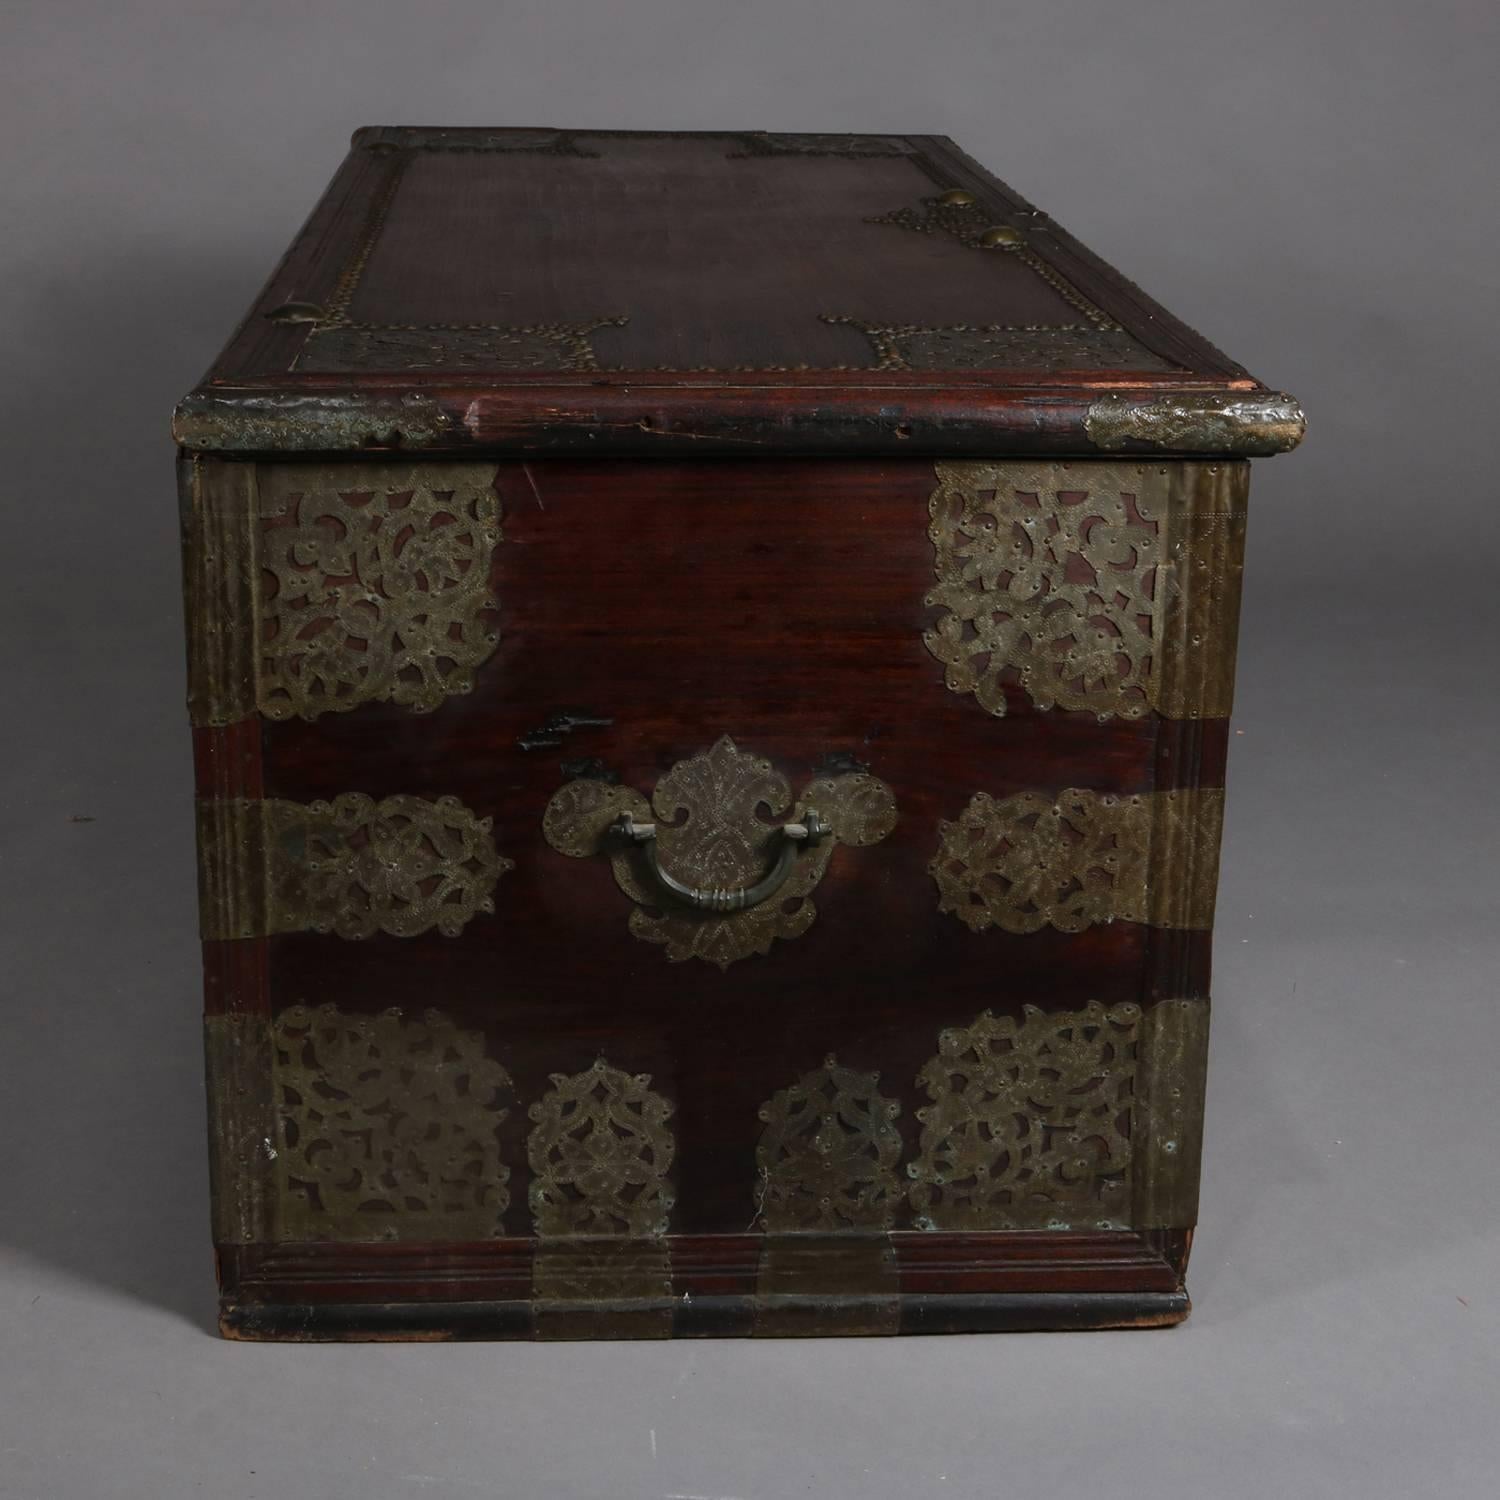 Embossed Antique Rosewood and Brass Turkish Marital Groom's Trunk, Early 19th Century